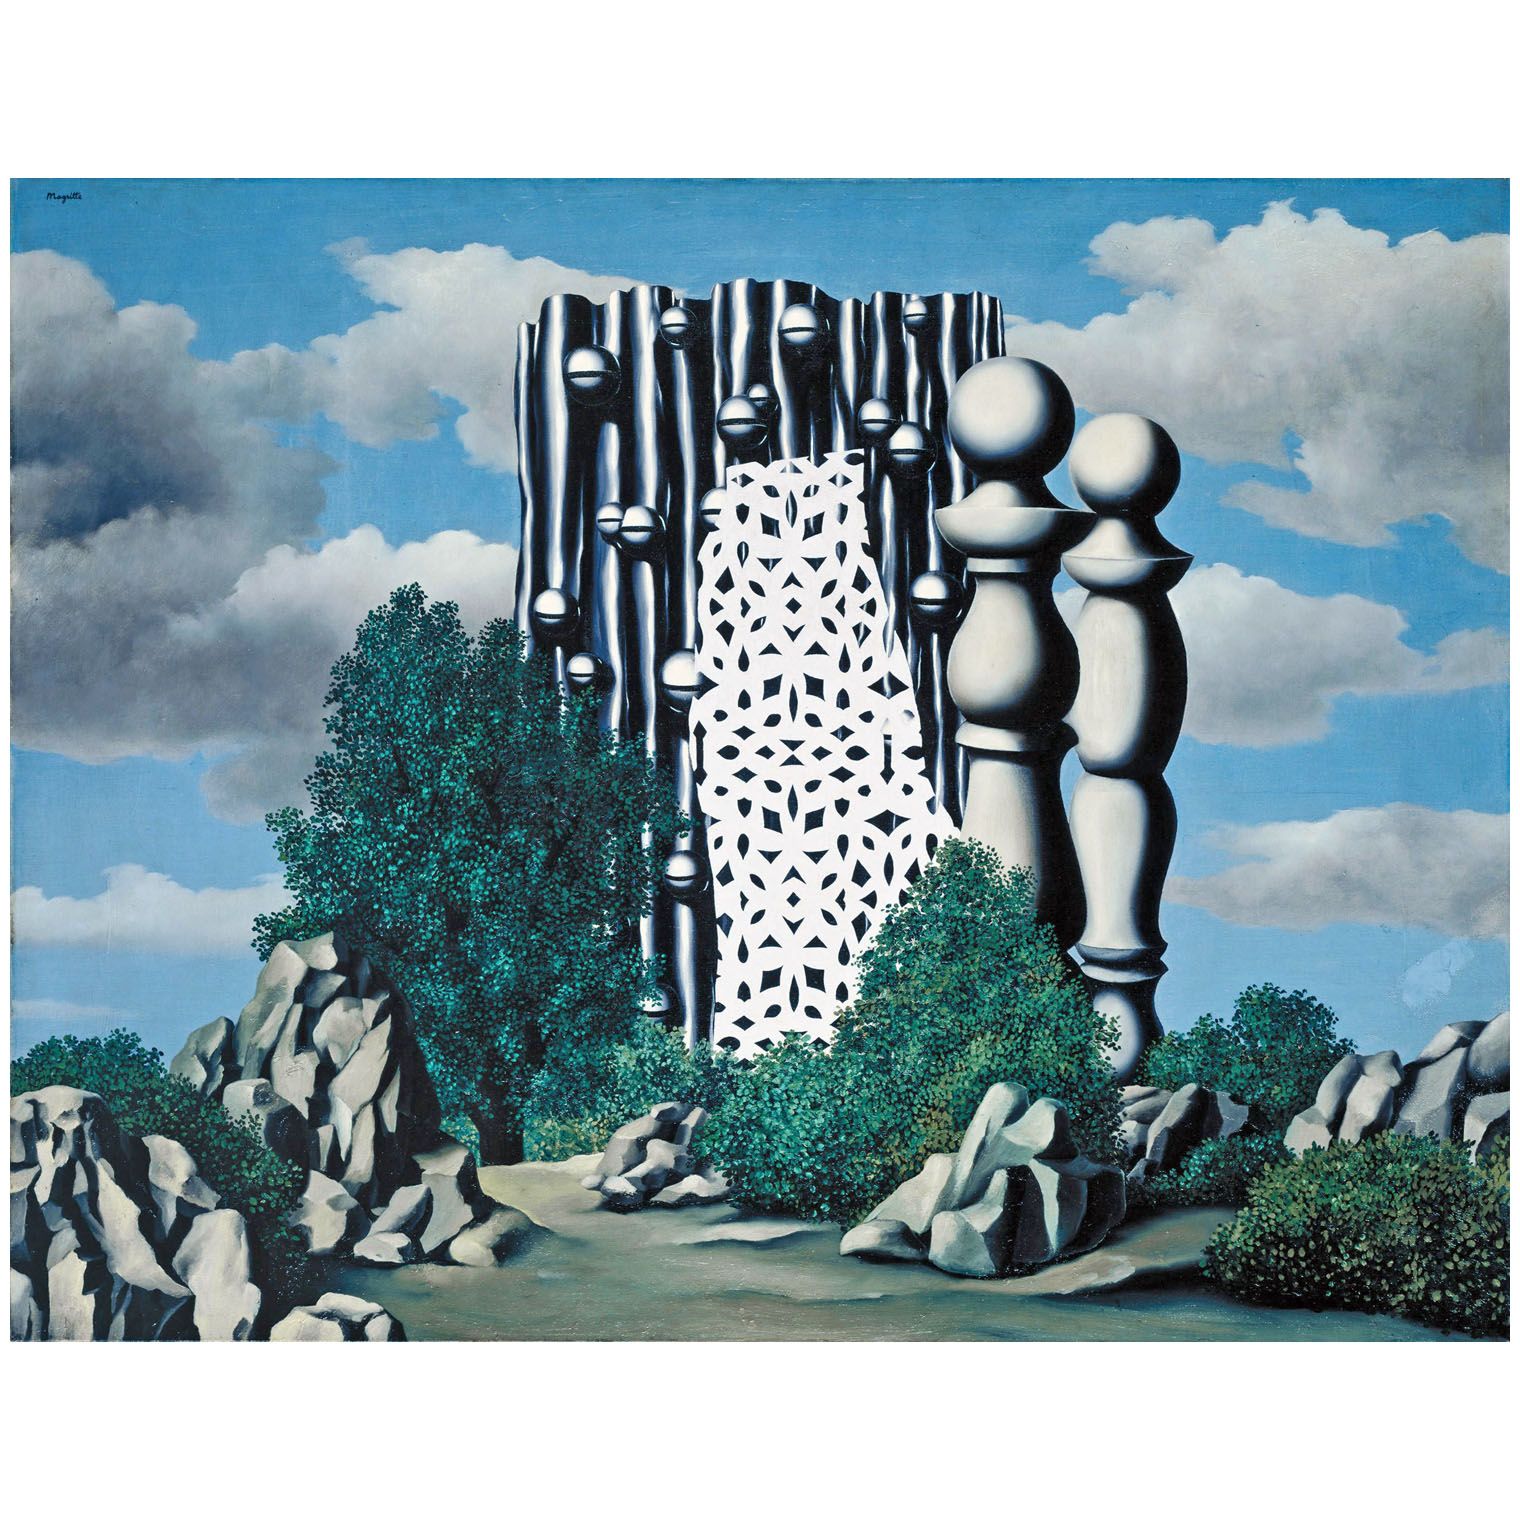 Rene Magritte. Annonciation. 1930. Tate Modern